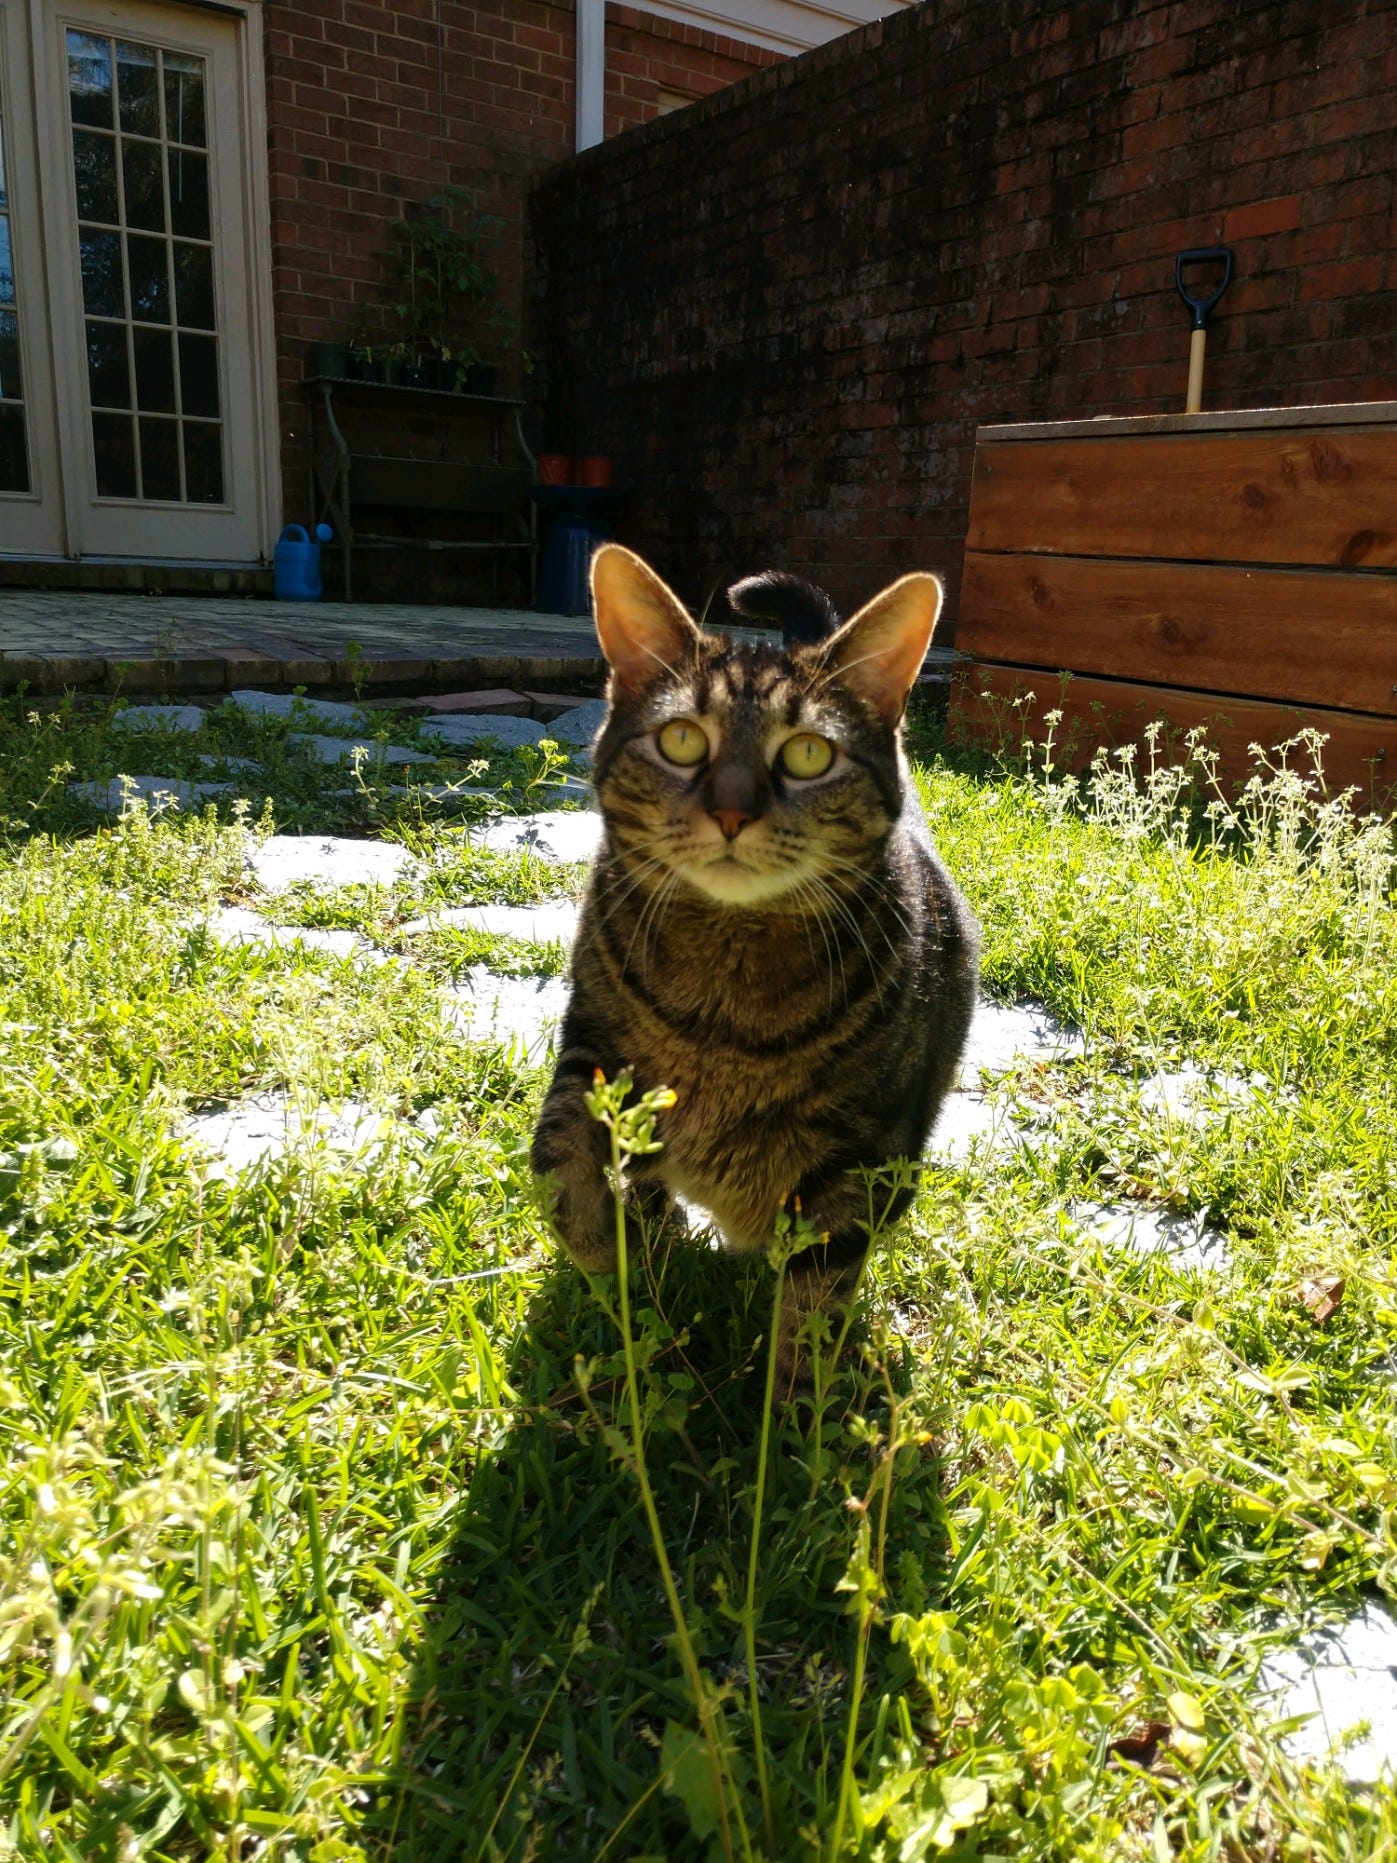 A tabby cat with big ears walks through a yard full of weeds